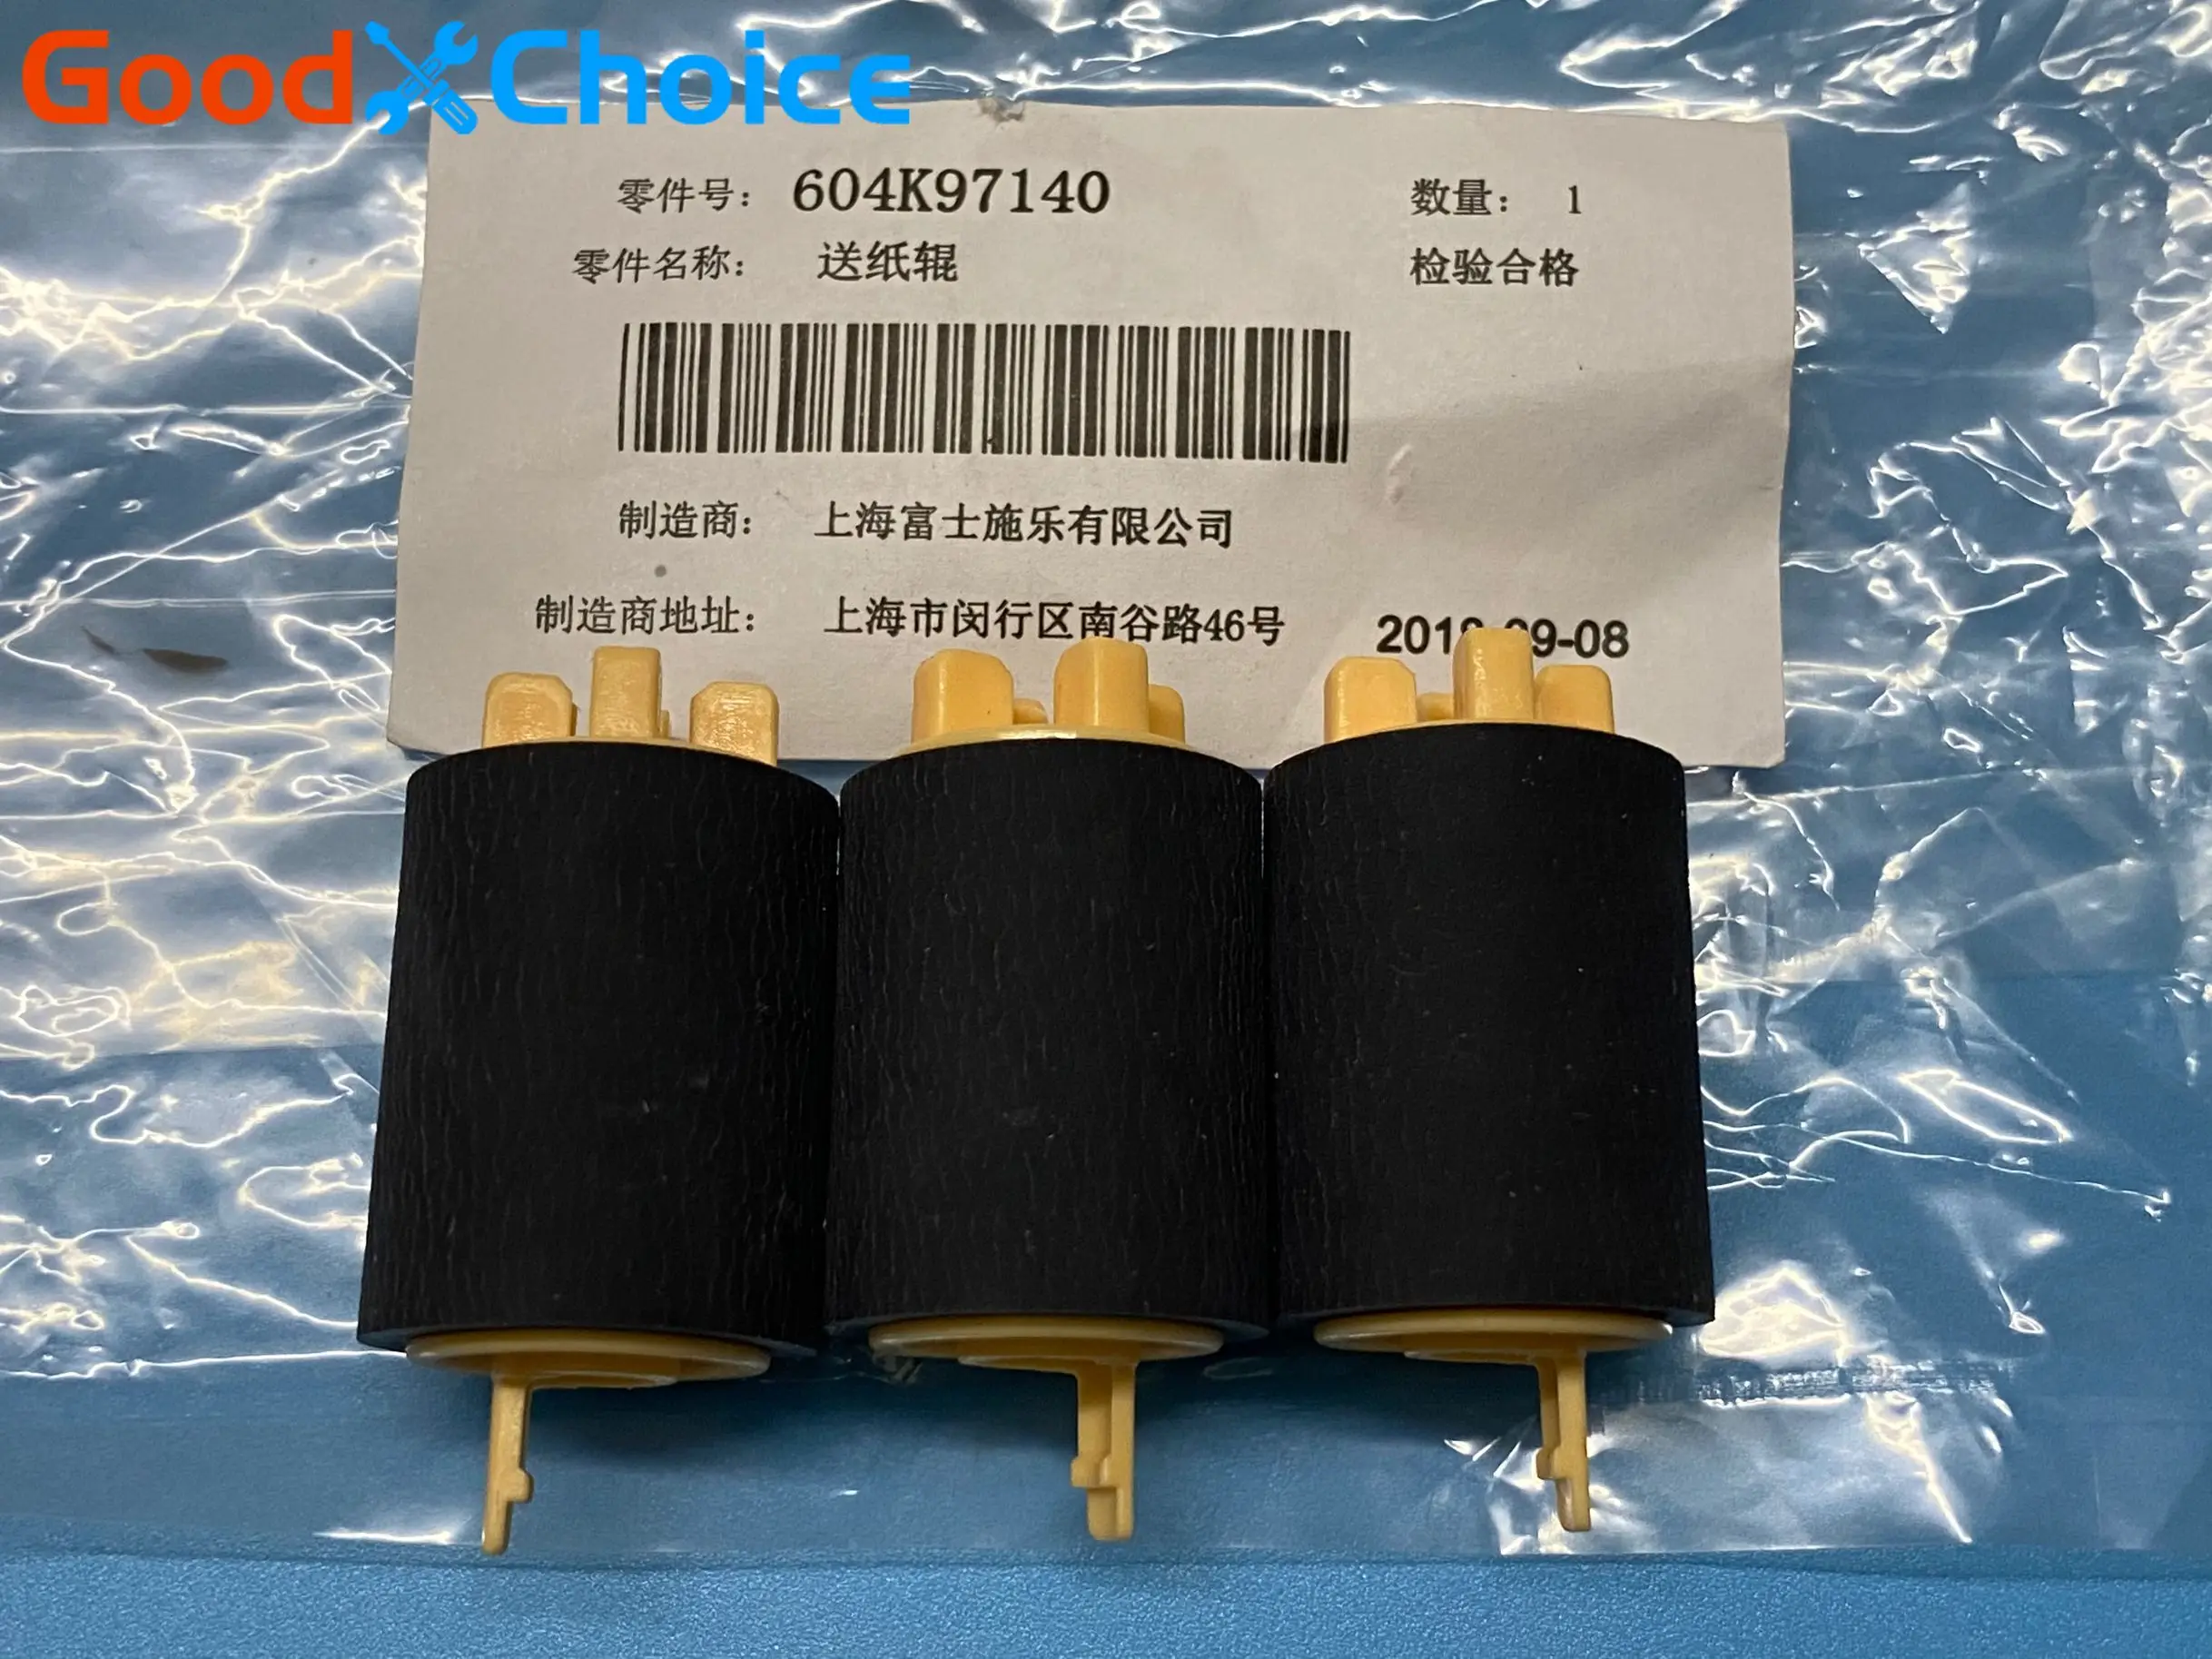 

100X JC97-02259A for Samsung SCX 6555 ML 5512 4510 M4580 M4370 Pickup Feed Separation Roller 022N02232 for Xerox 4600 4260 4150